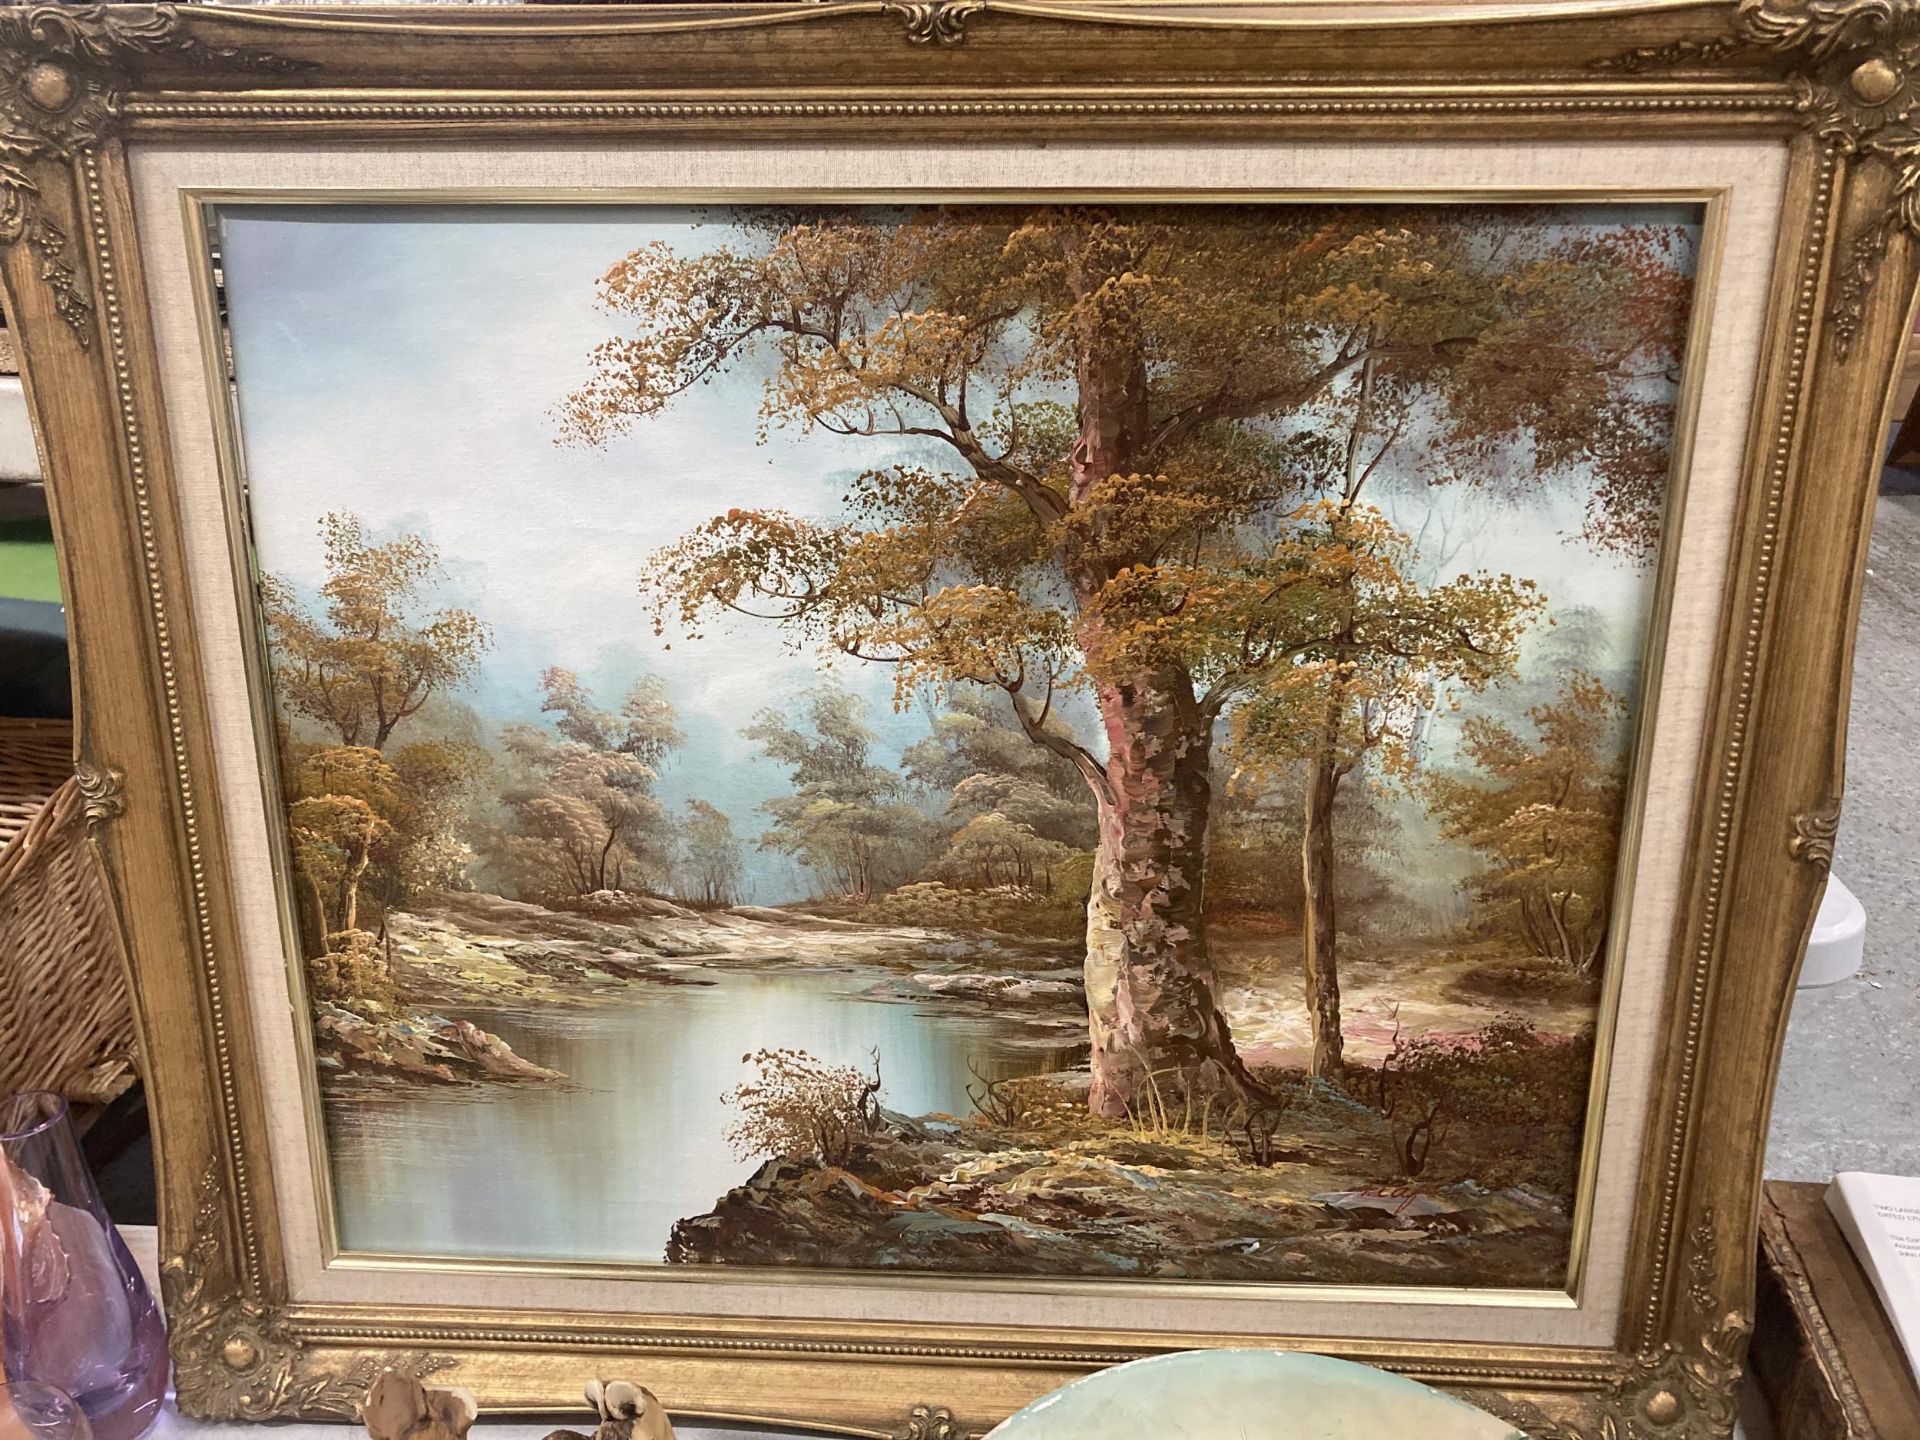 AN OIL ON CANVAS PAINTING OF A LAKE IN A WOODLAND SETTING IN A GILT FRAME 74CM X 64CM